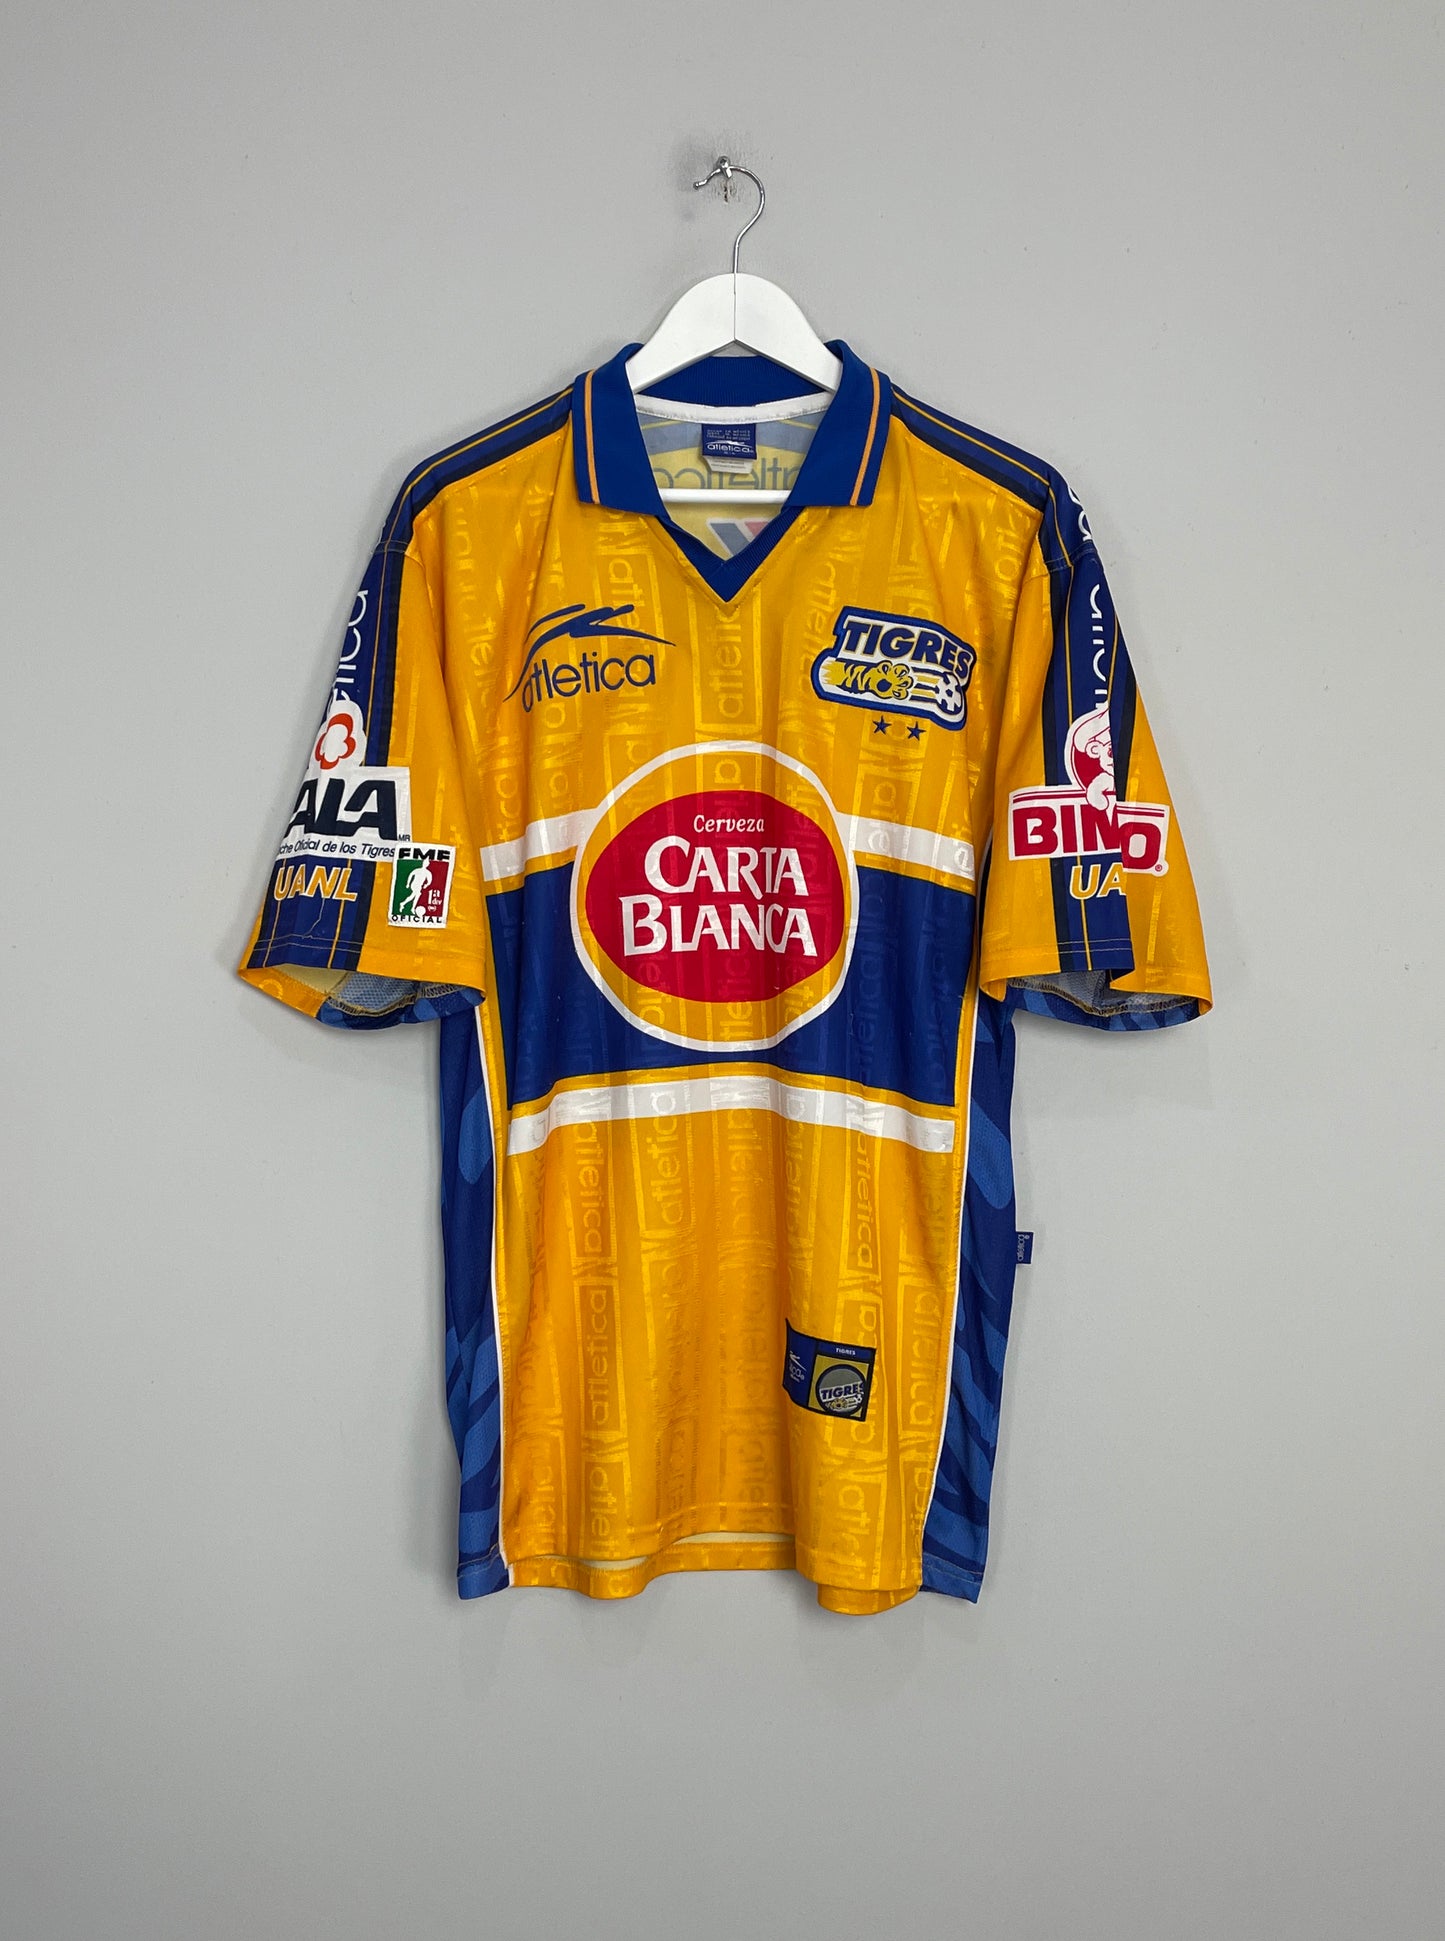 Image of the Tigres shirt from the 2000/01 season